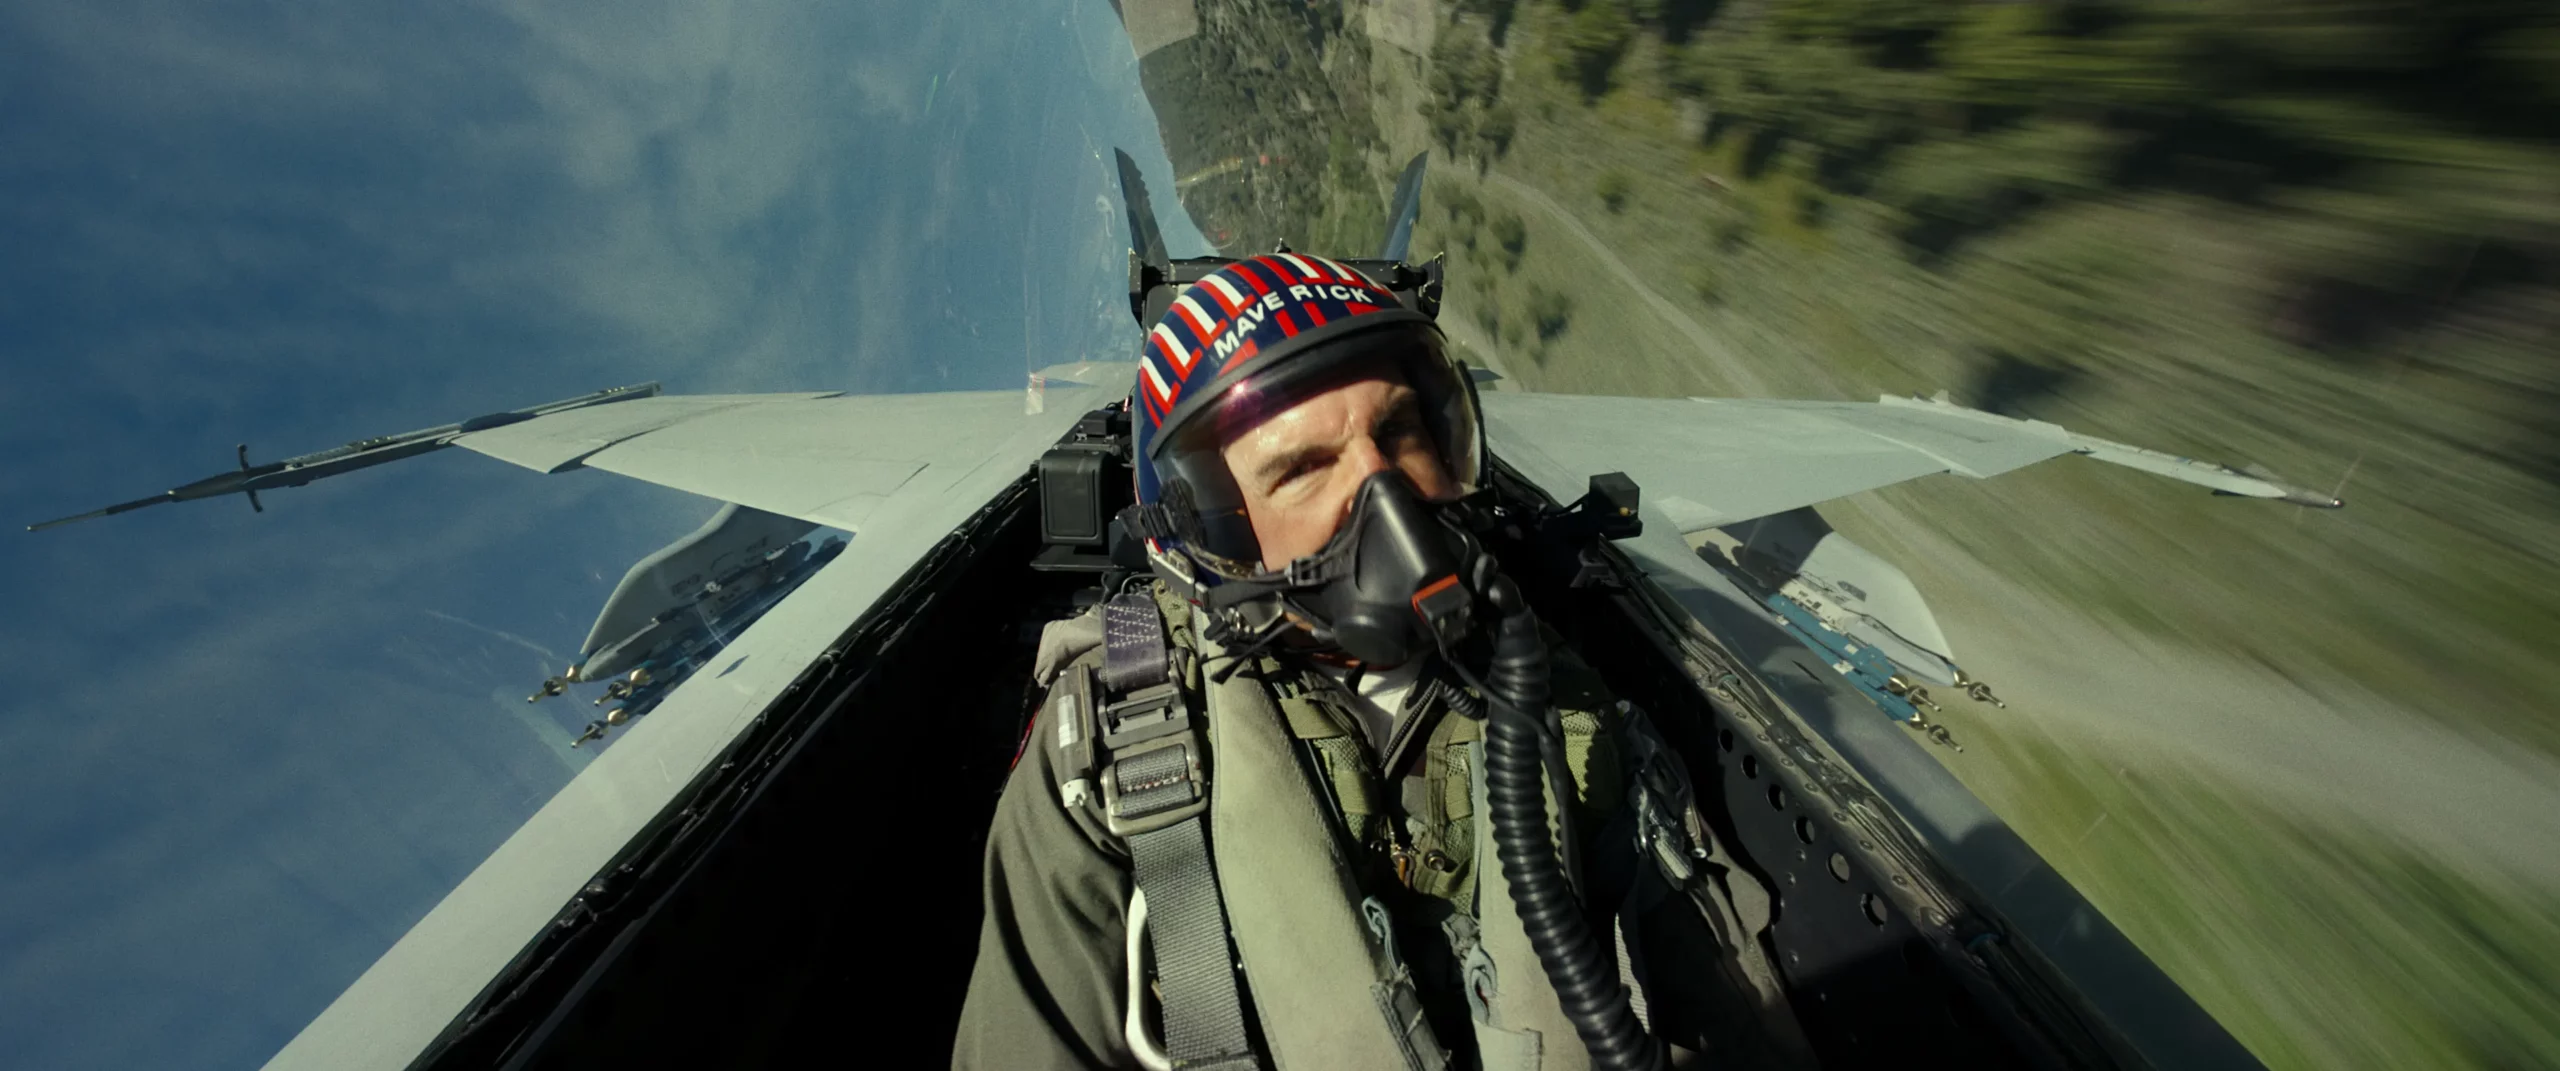 Exciting Sneak Peek: What's Next for Tom Cruise in 'Top Gun 3'? Fans Can't Wait!